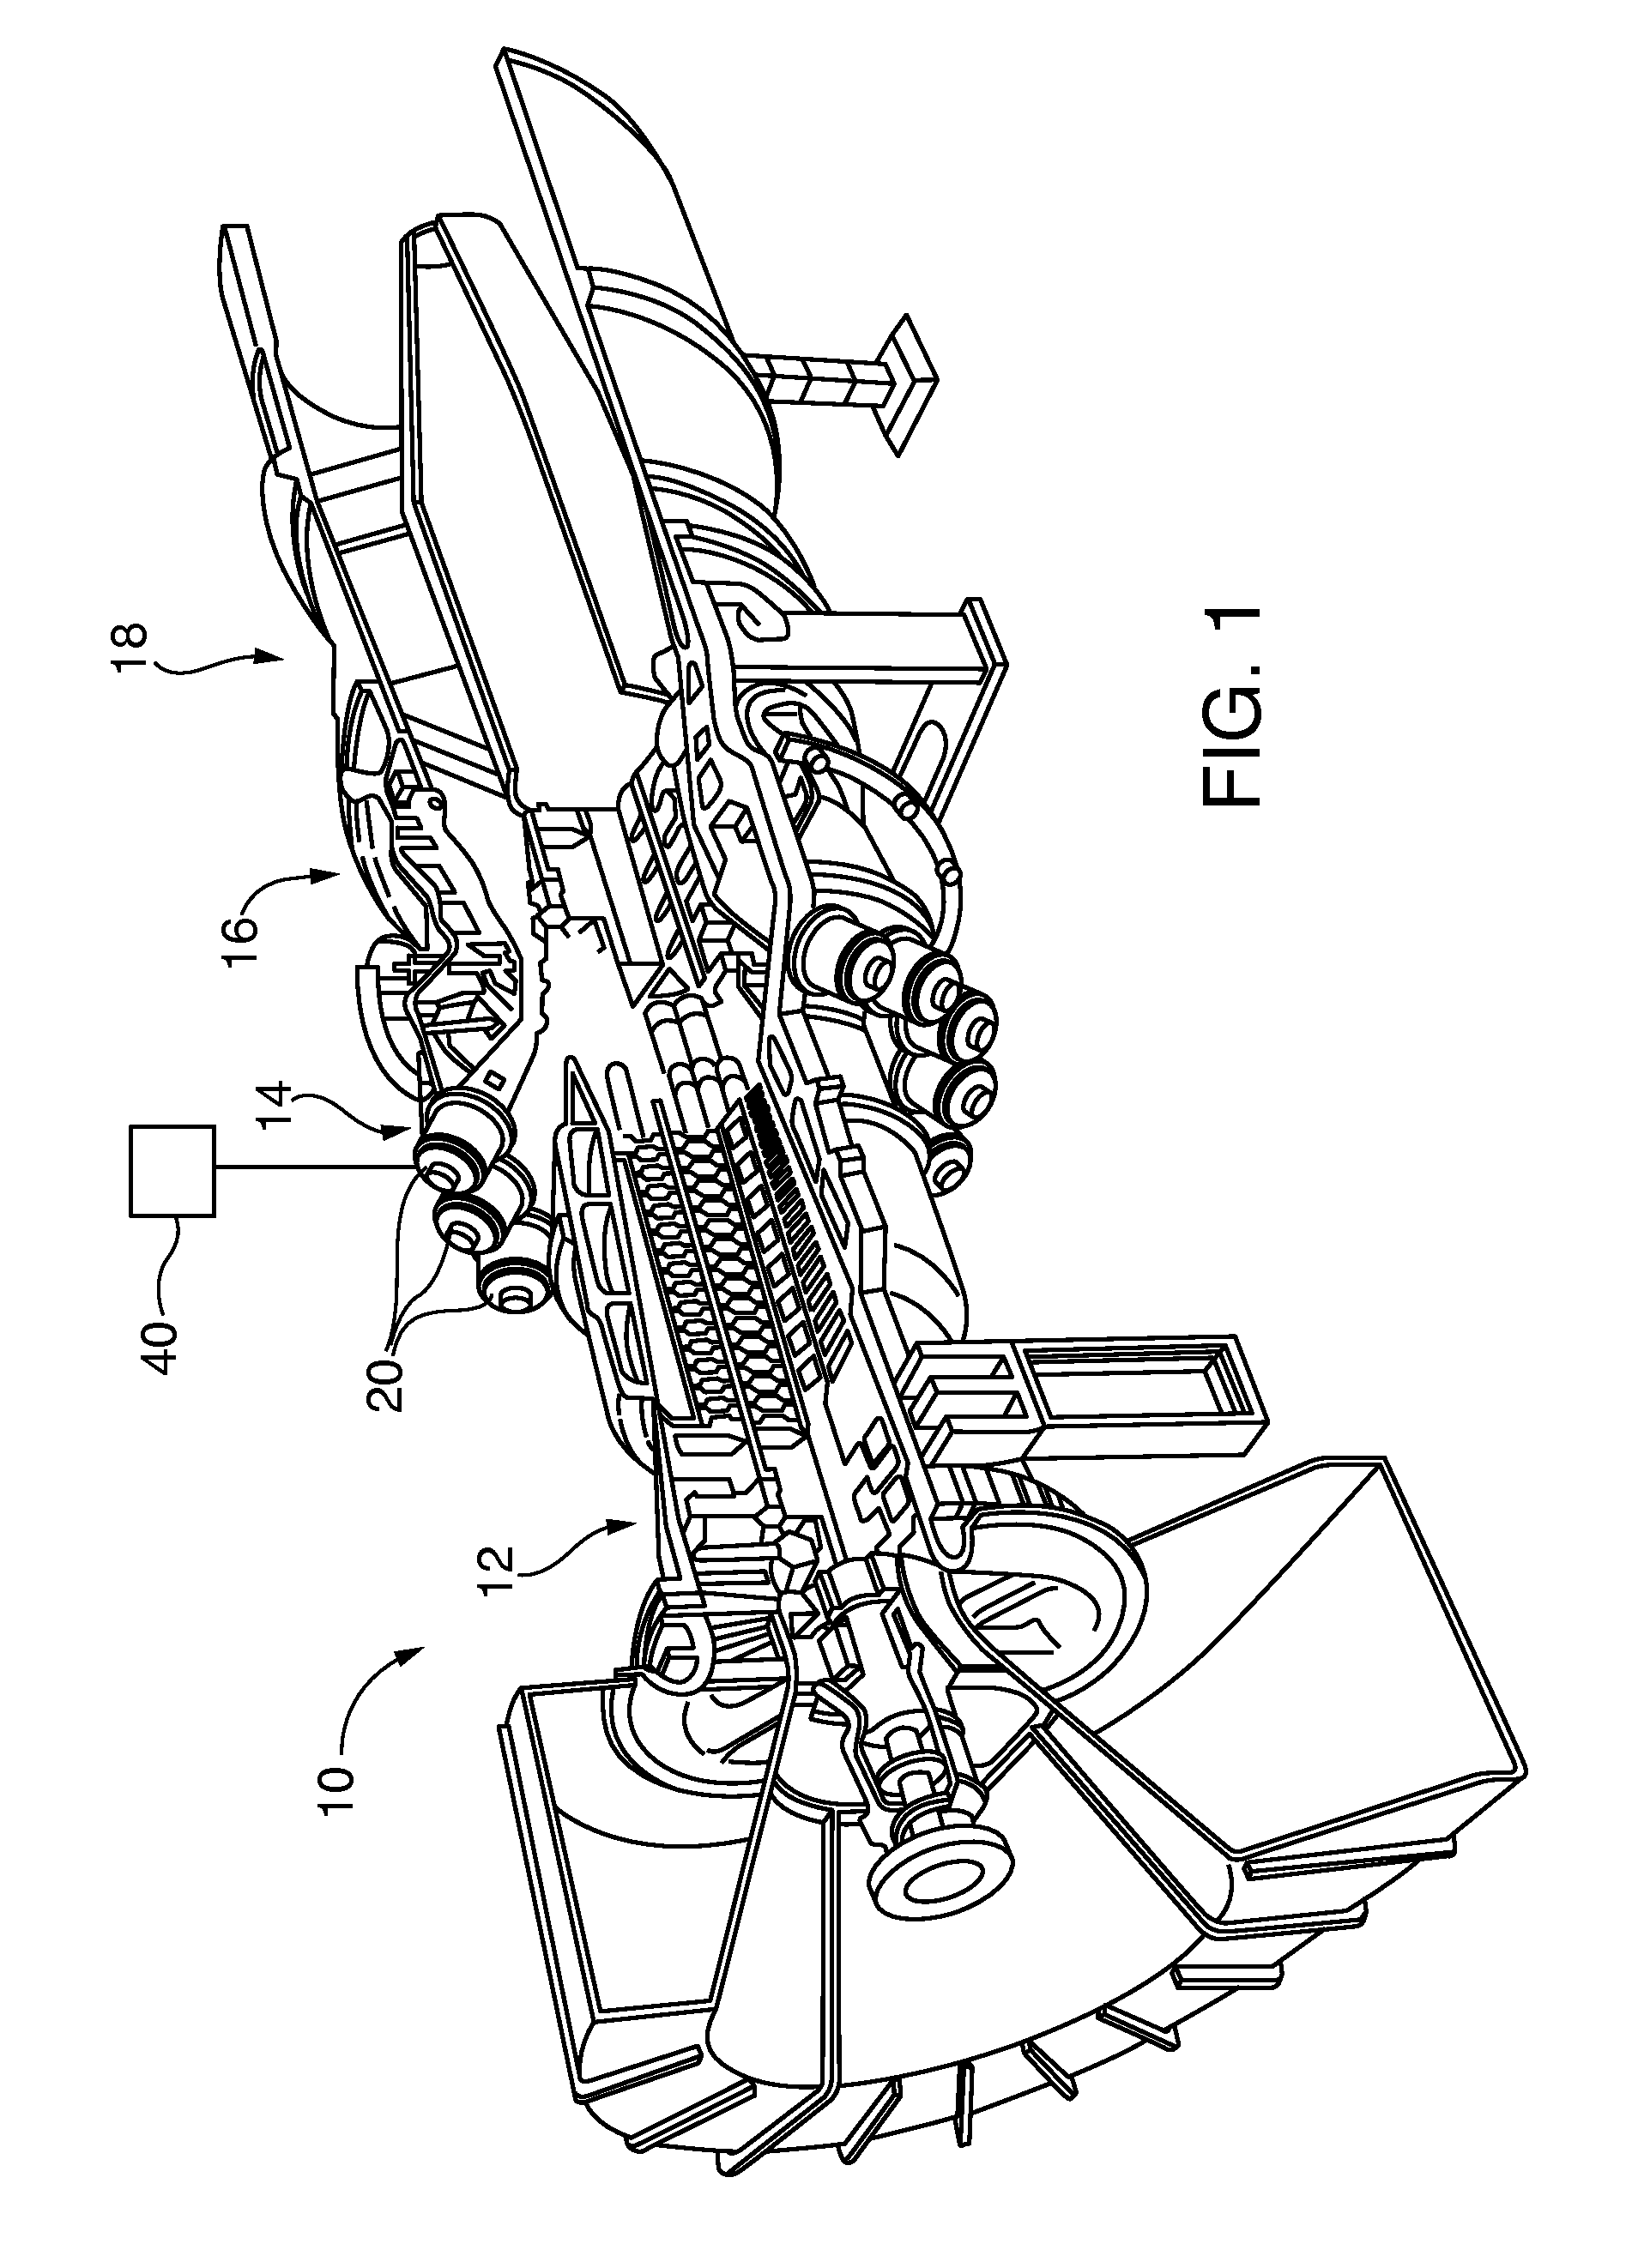 Active measurement of gas flow velocity or simultaneous measurement of velocity and temperature, including in gas turbine combustors